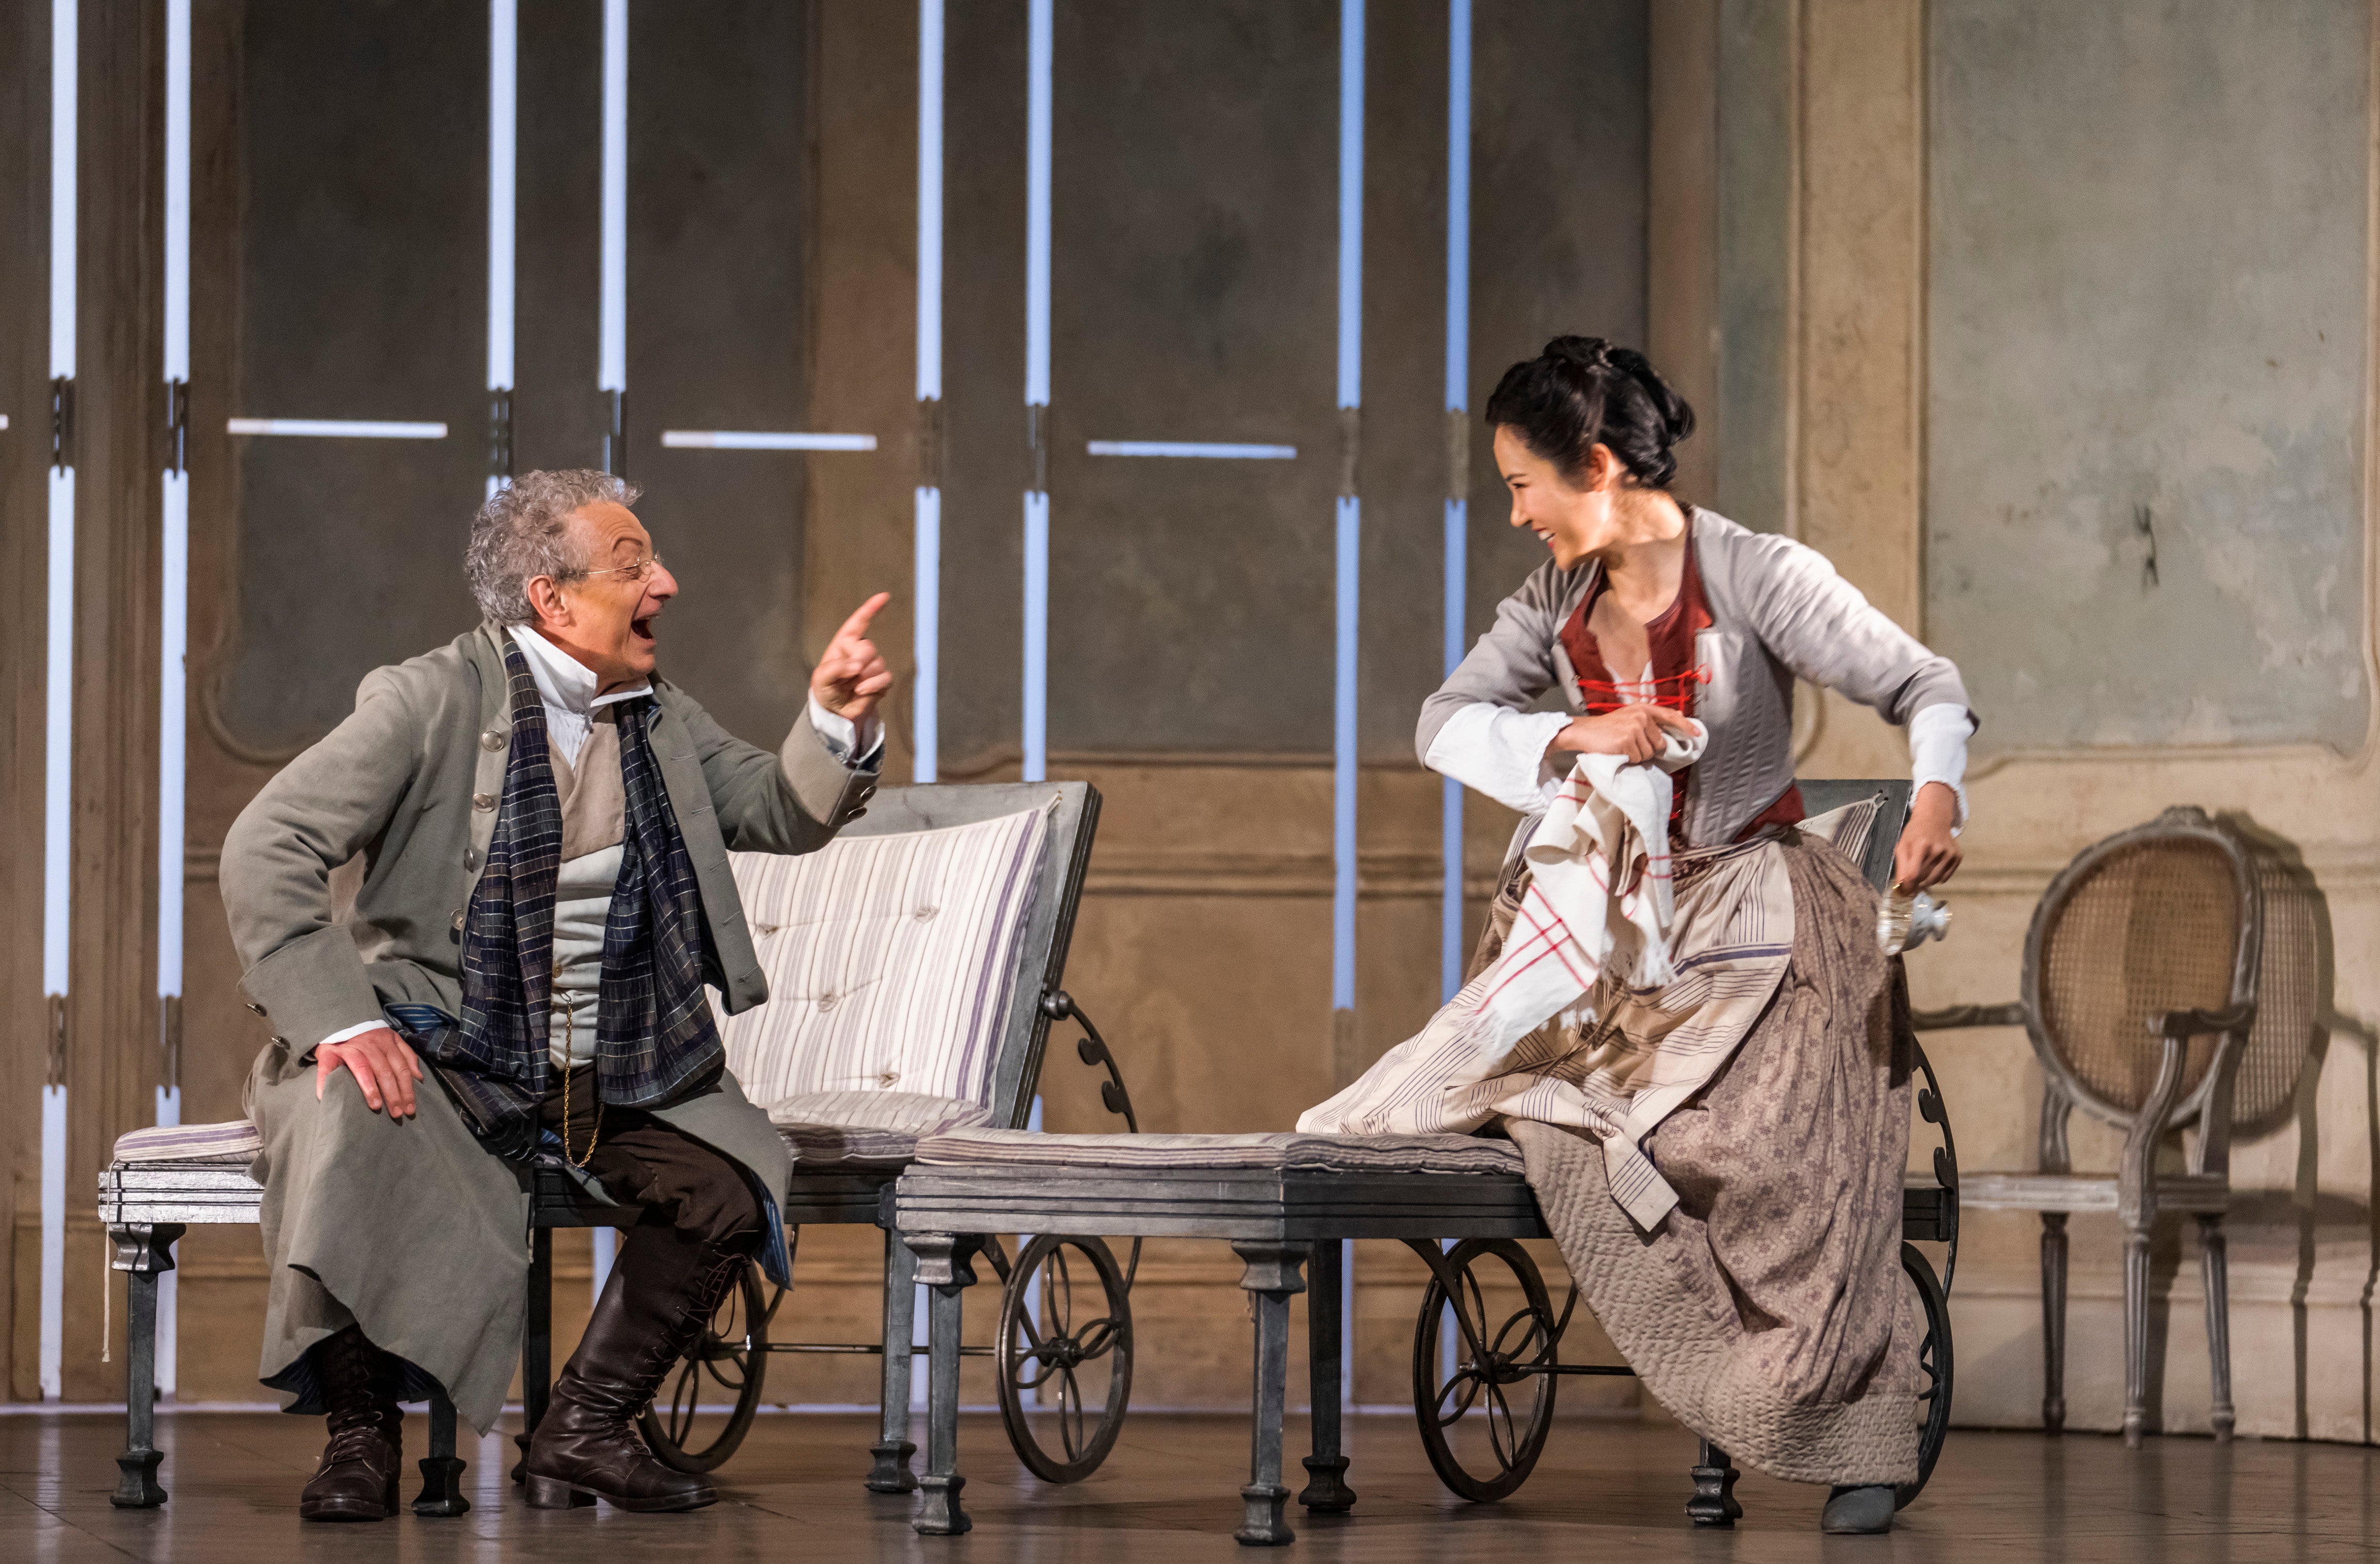 Alessandro Corbelli as Don Alfonso and Hera Hyesang Park as Despina in ‘Cosi fan tutte’ at Glyndebourne